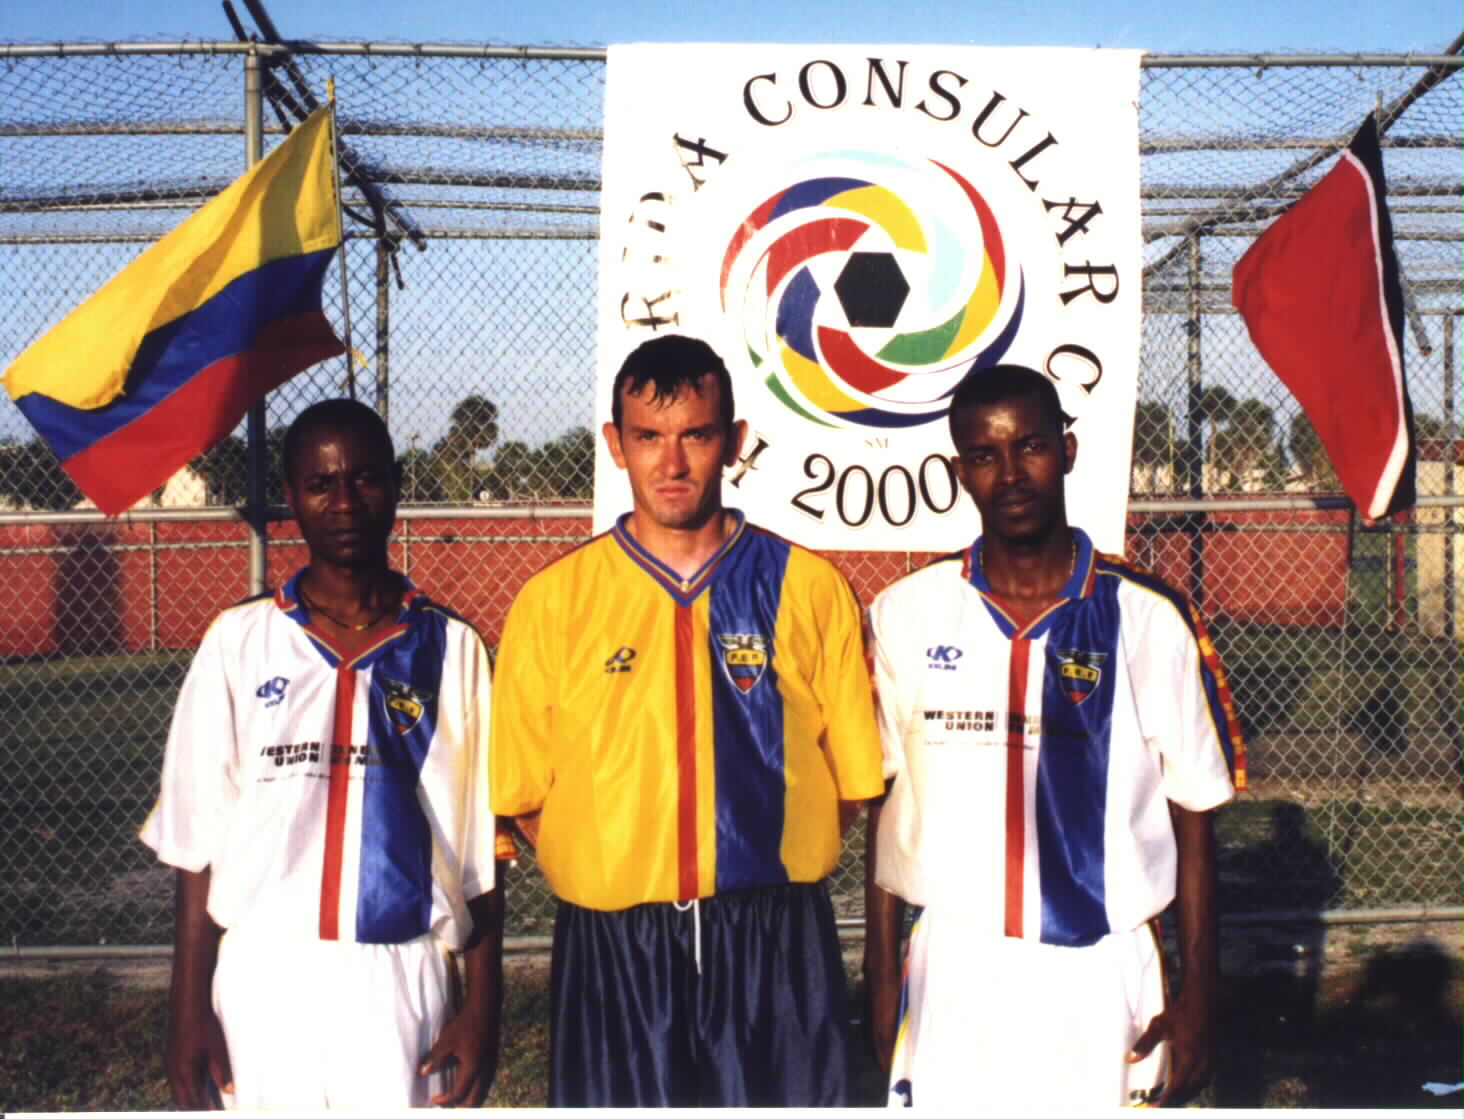 (Haitian defensive Sweeper, Ecuadorian Goal Keeper and Haitian midfielder pausing for picture during Florida Consular cup 2000.(Picture courtesy of Noe
Dorestant) ... Give credit where credit is due